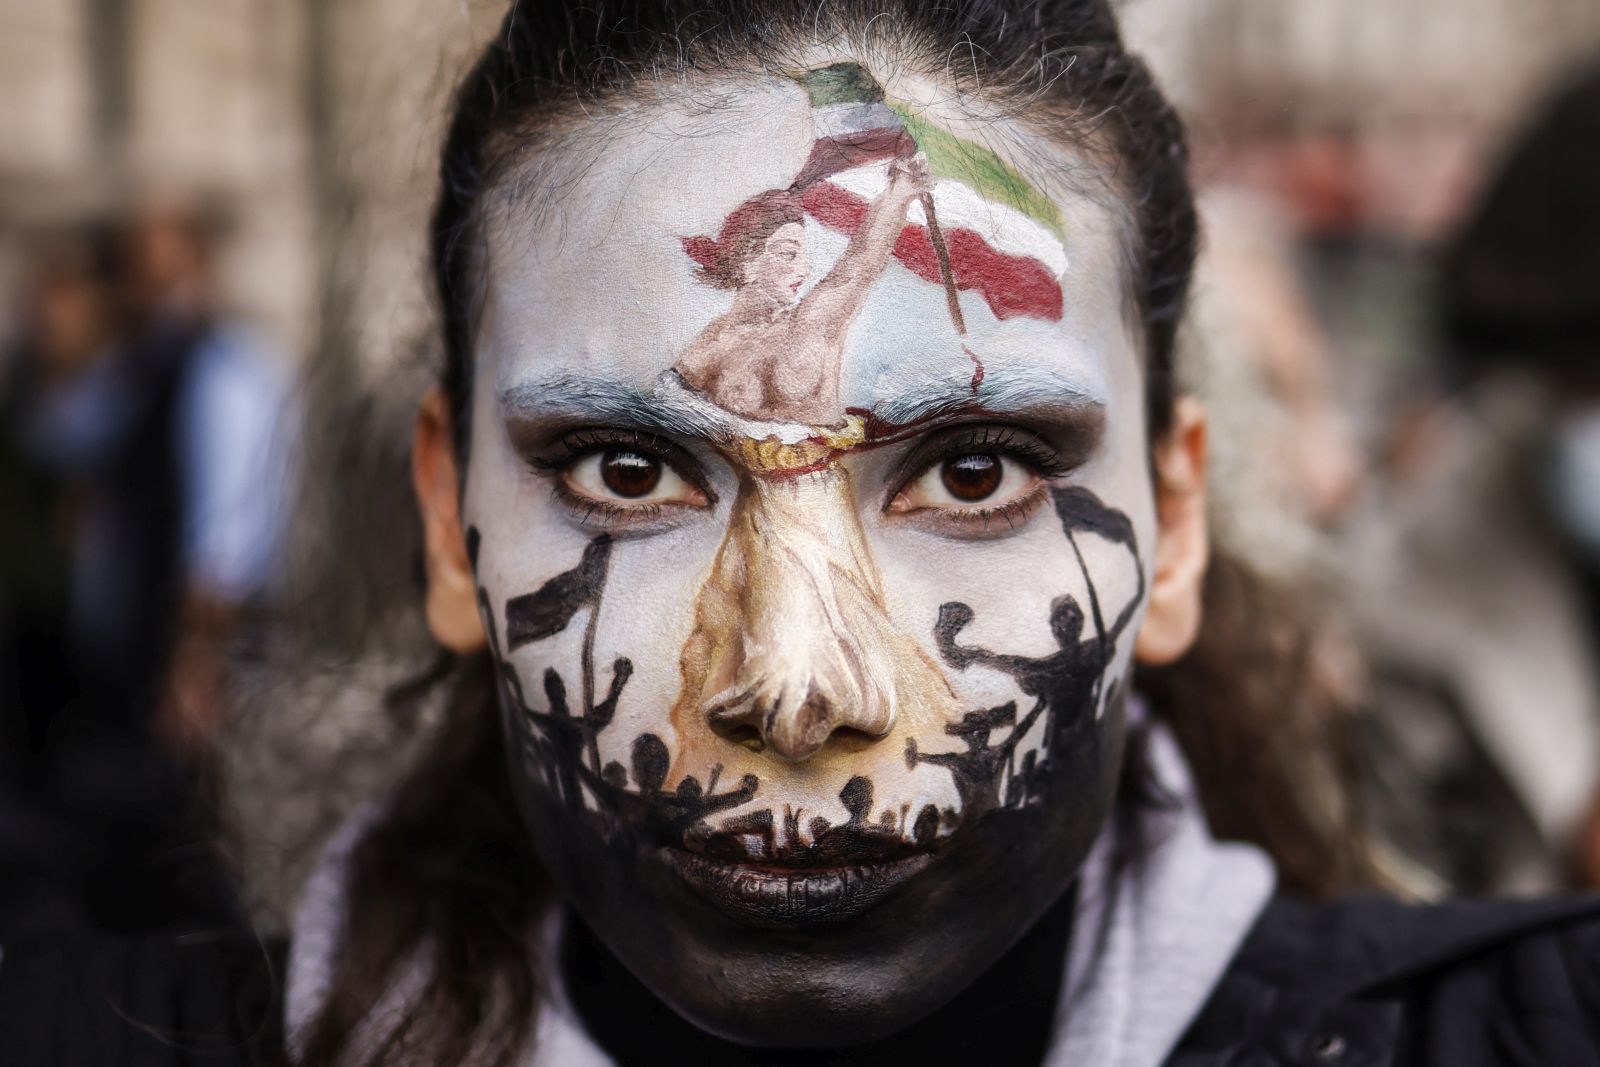 epa10219686 A woman with her face painted participates in a rally in support of Iranian women in Paris, France, 02 October 2022. This demonstration takes place following the deaths of Mahsa Amini, who died while in police custody after being detained by Iran's morality police, and Hadis Najafi, who was shot during a protest in Iran.  EPA/YOAN VALAT